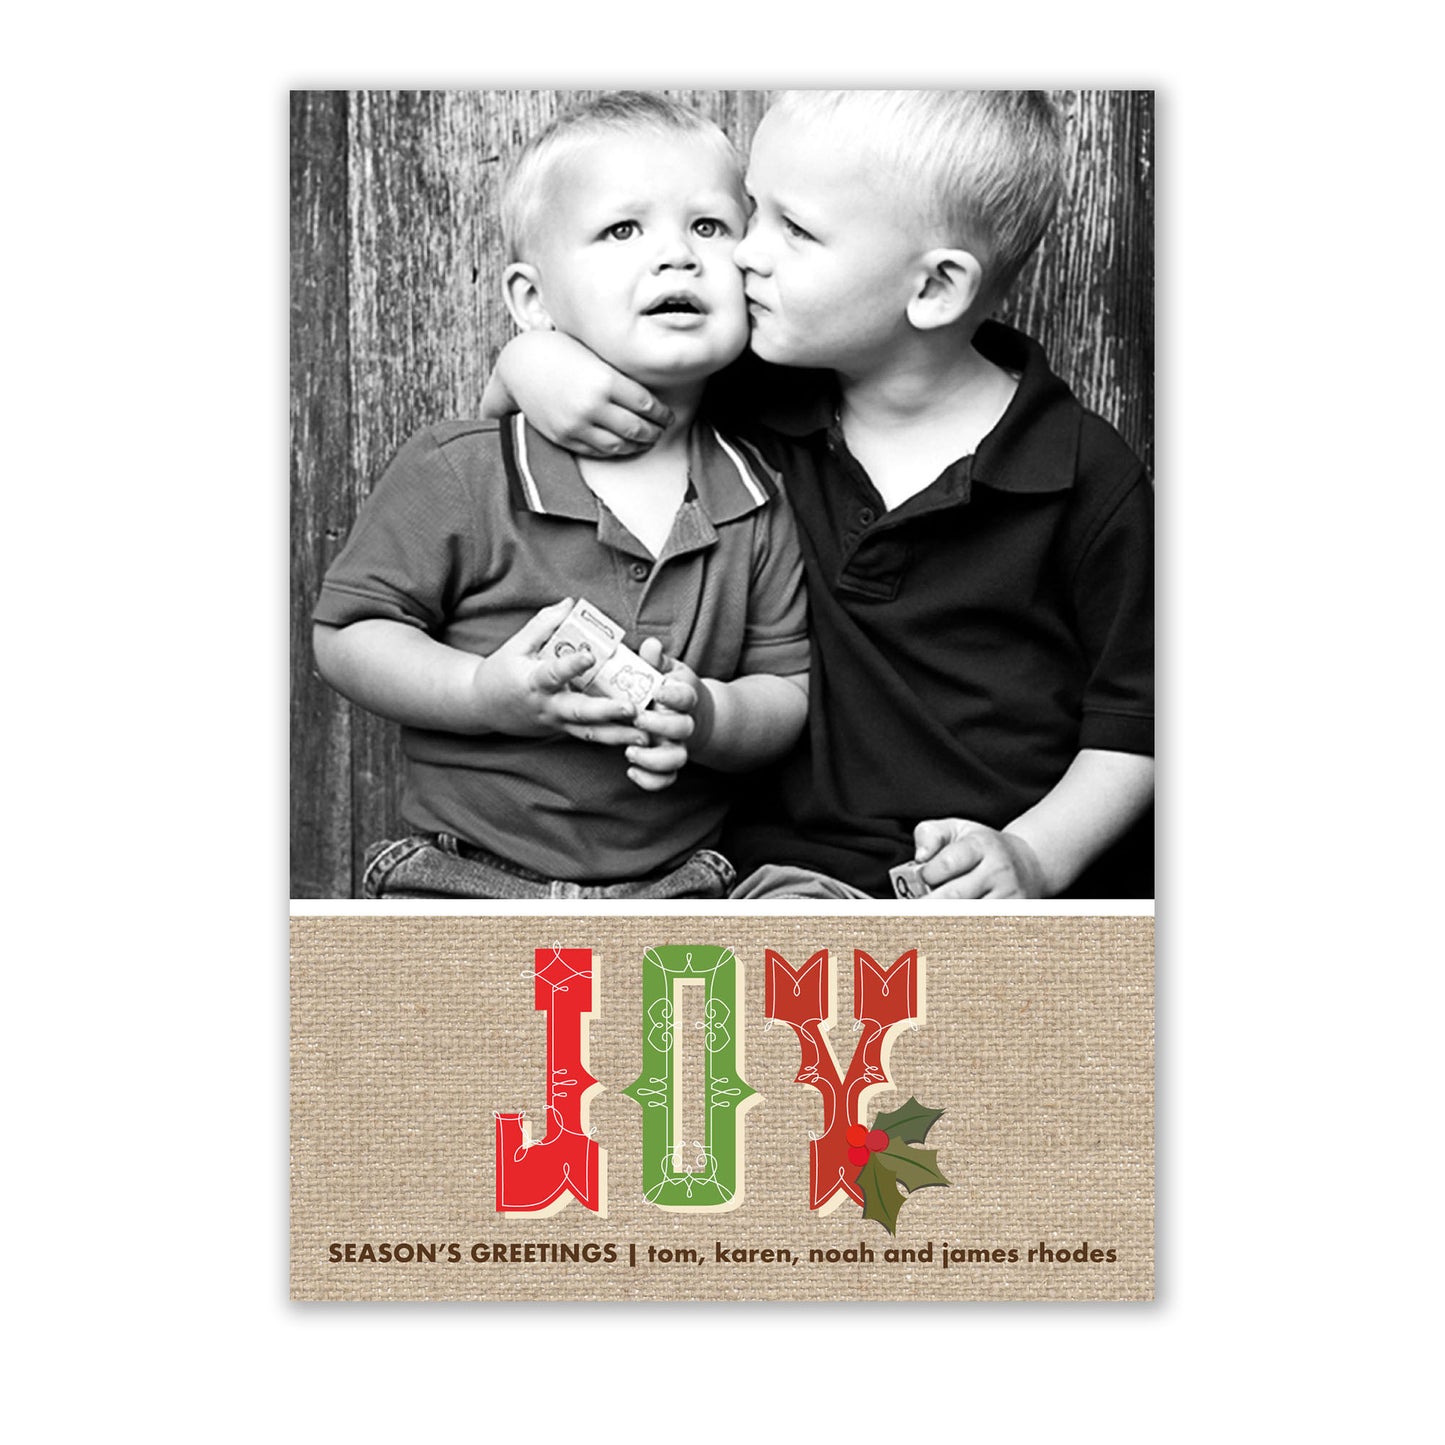 Two boys joyfully kissing on a Rustic Joy Photo Card by Noteworthy with white unlined envelopes.